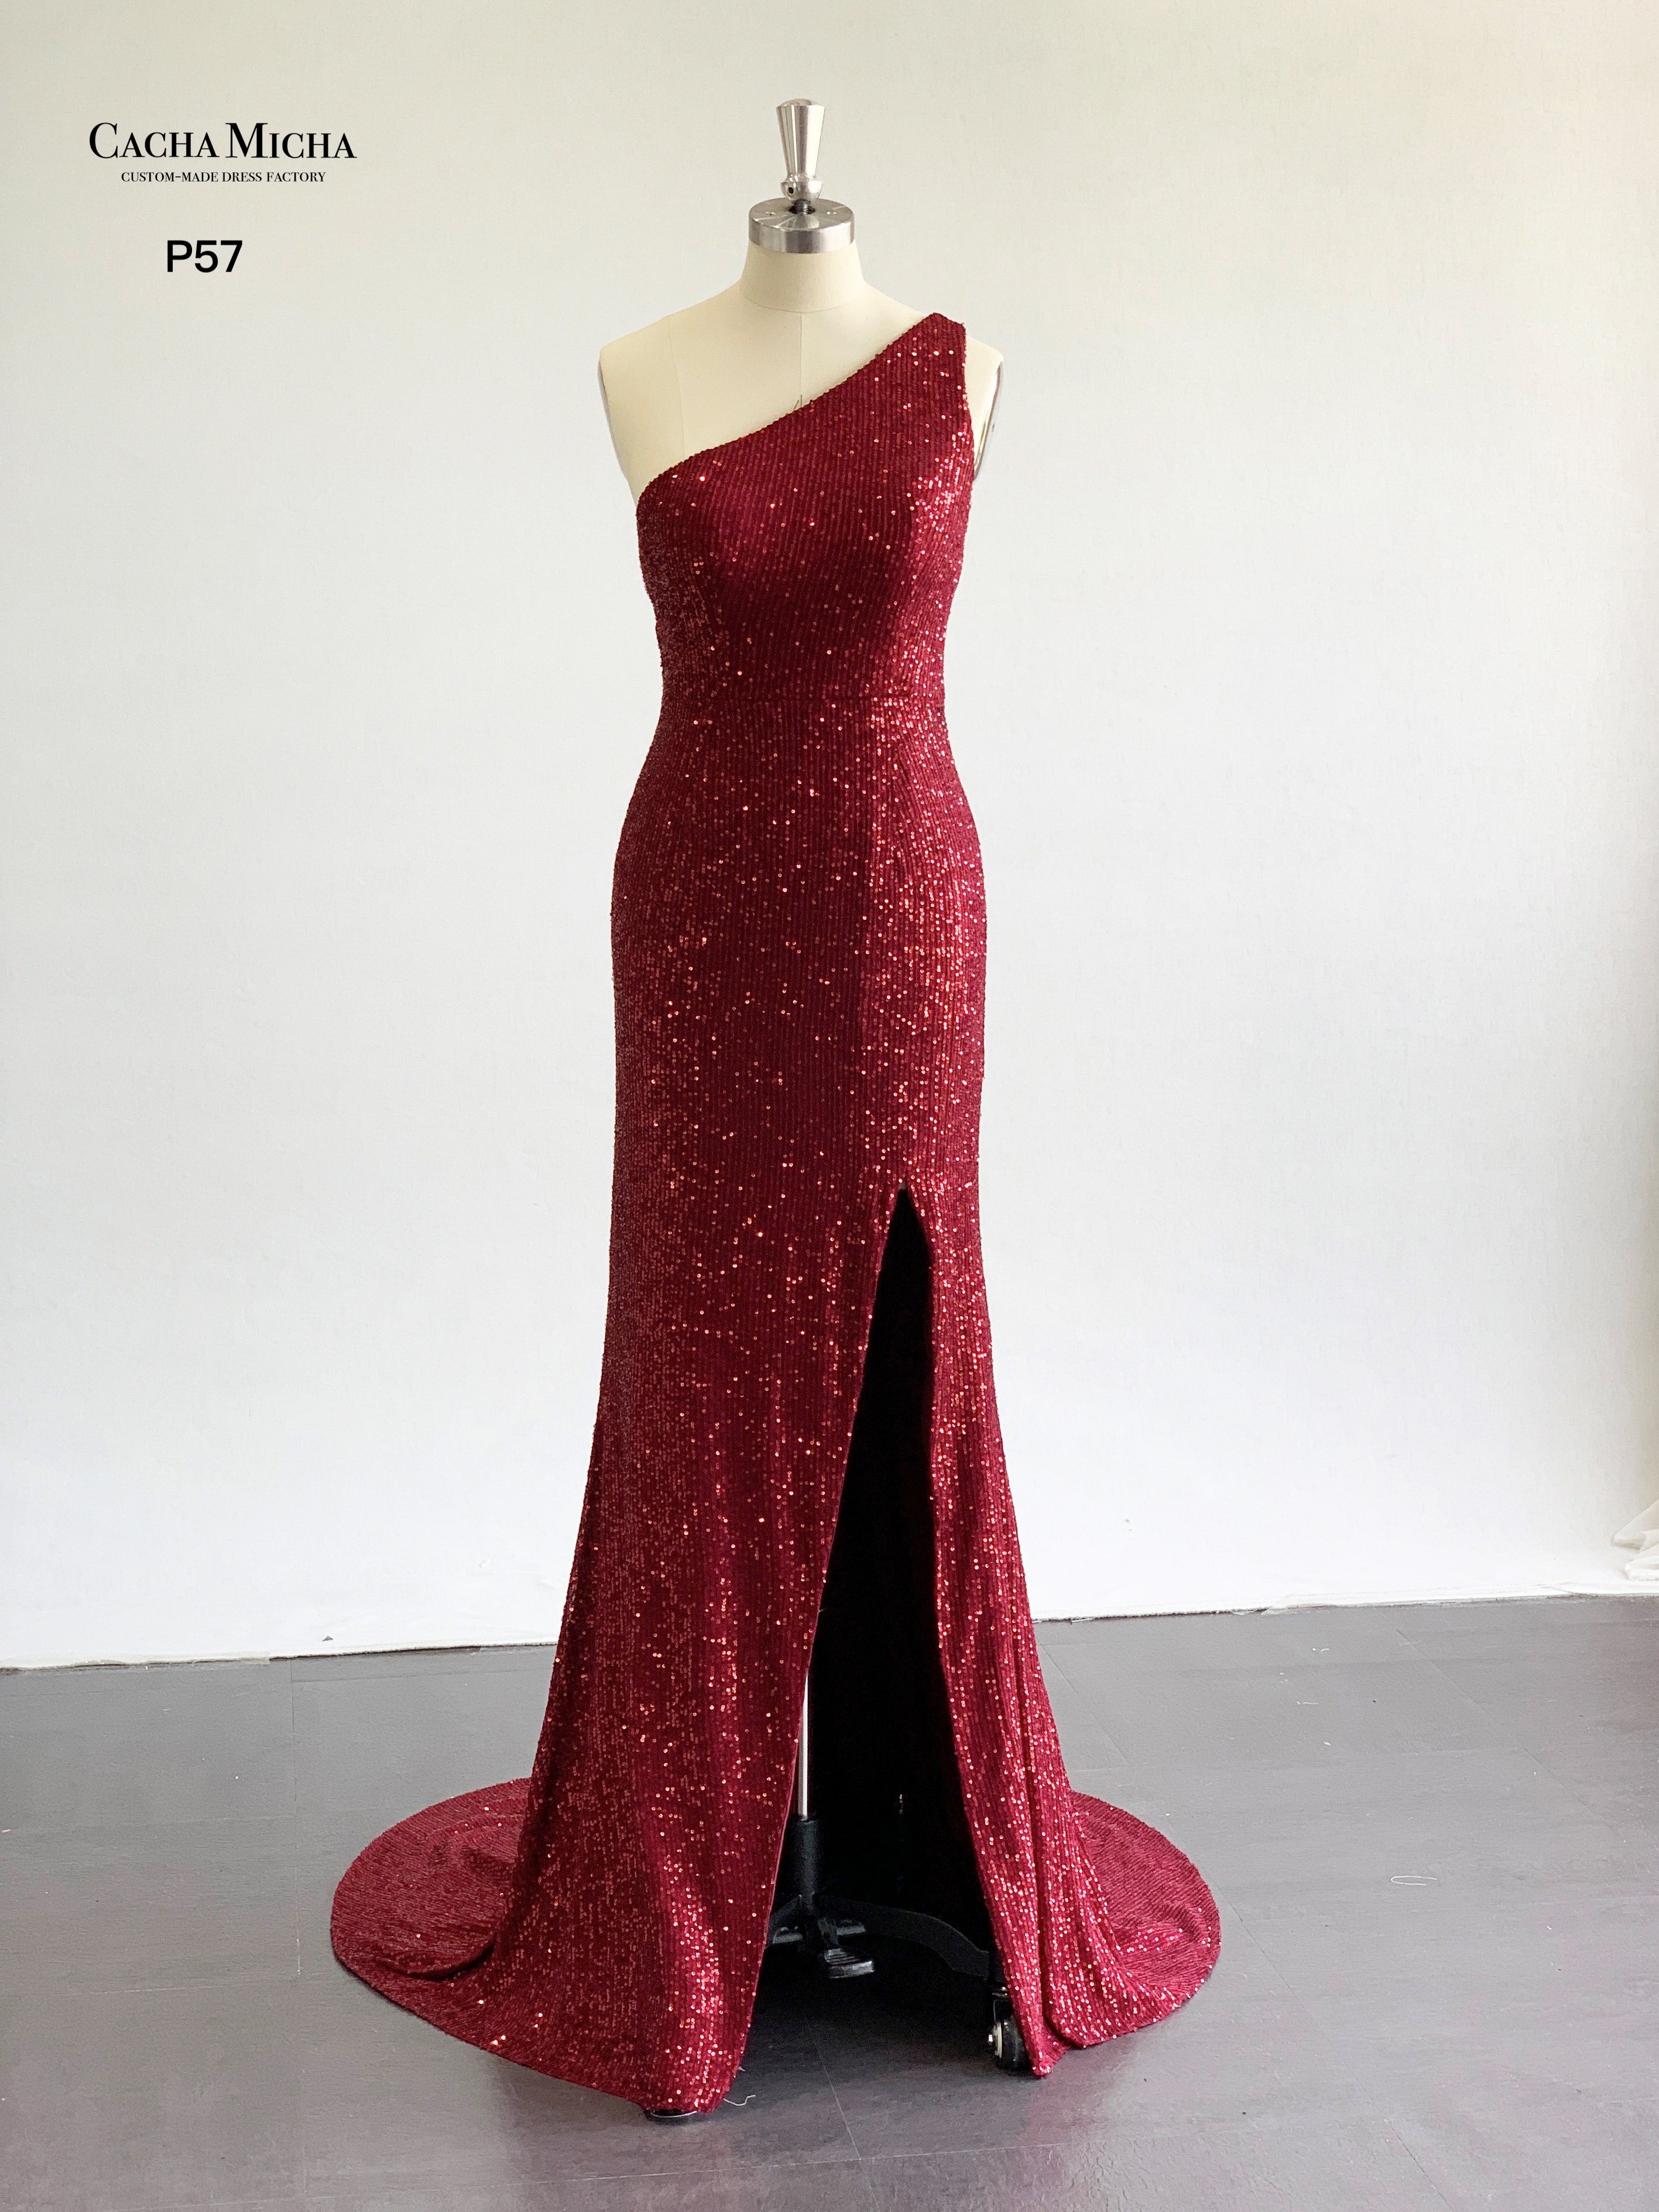 One Shoulder Wine Red Sequin Prom Dress P57